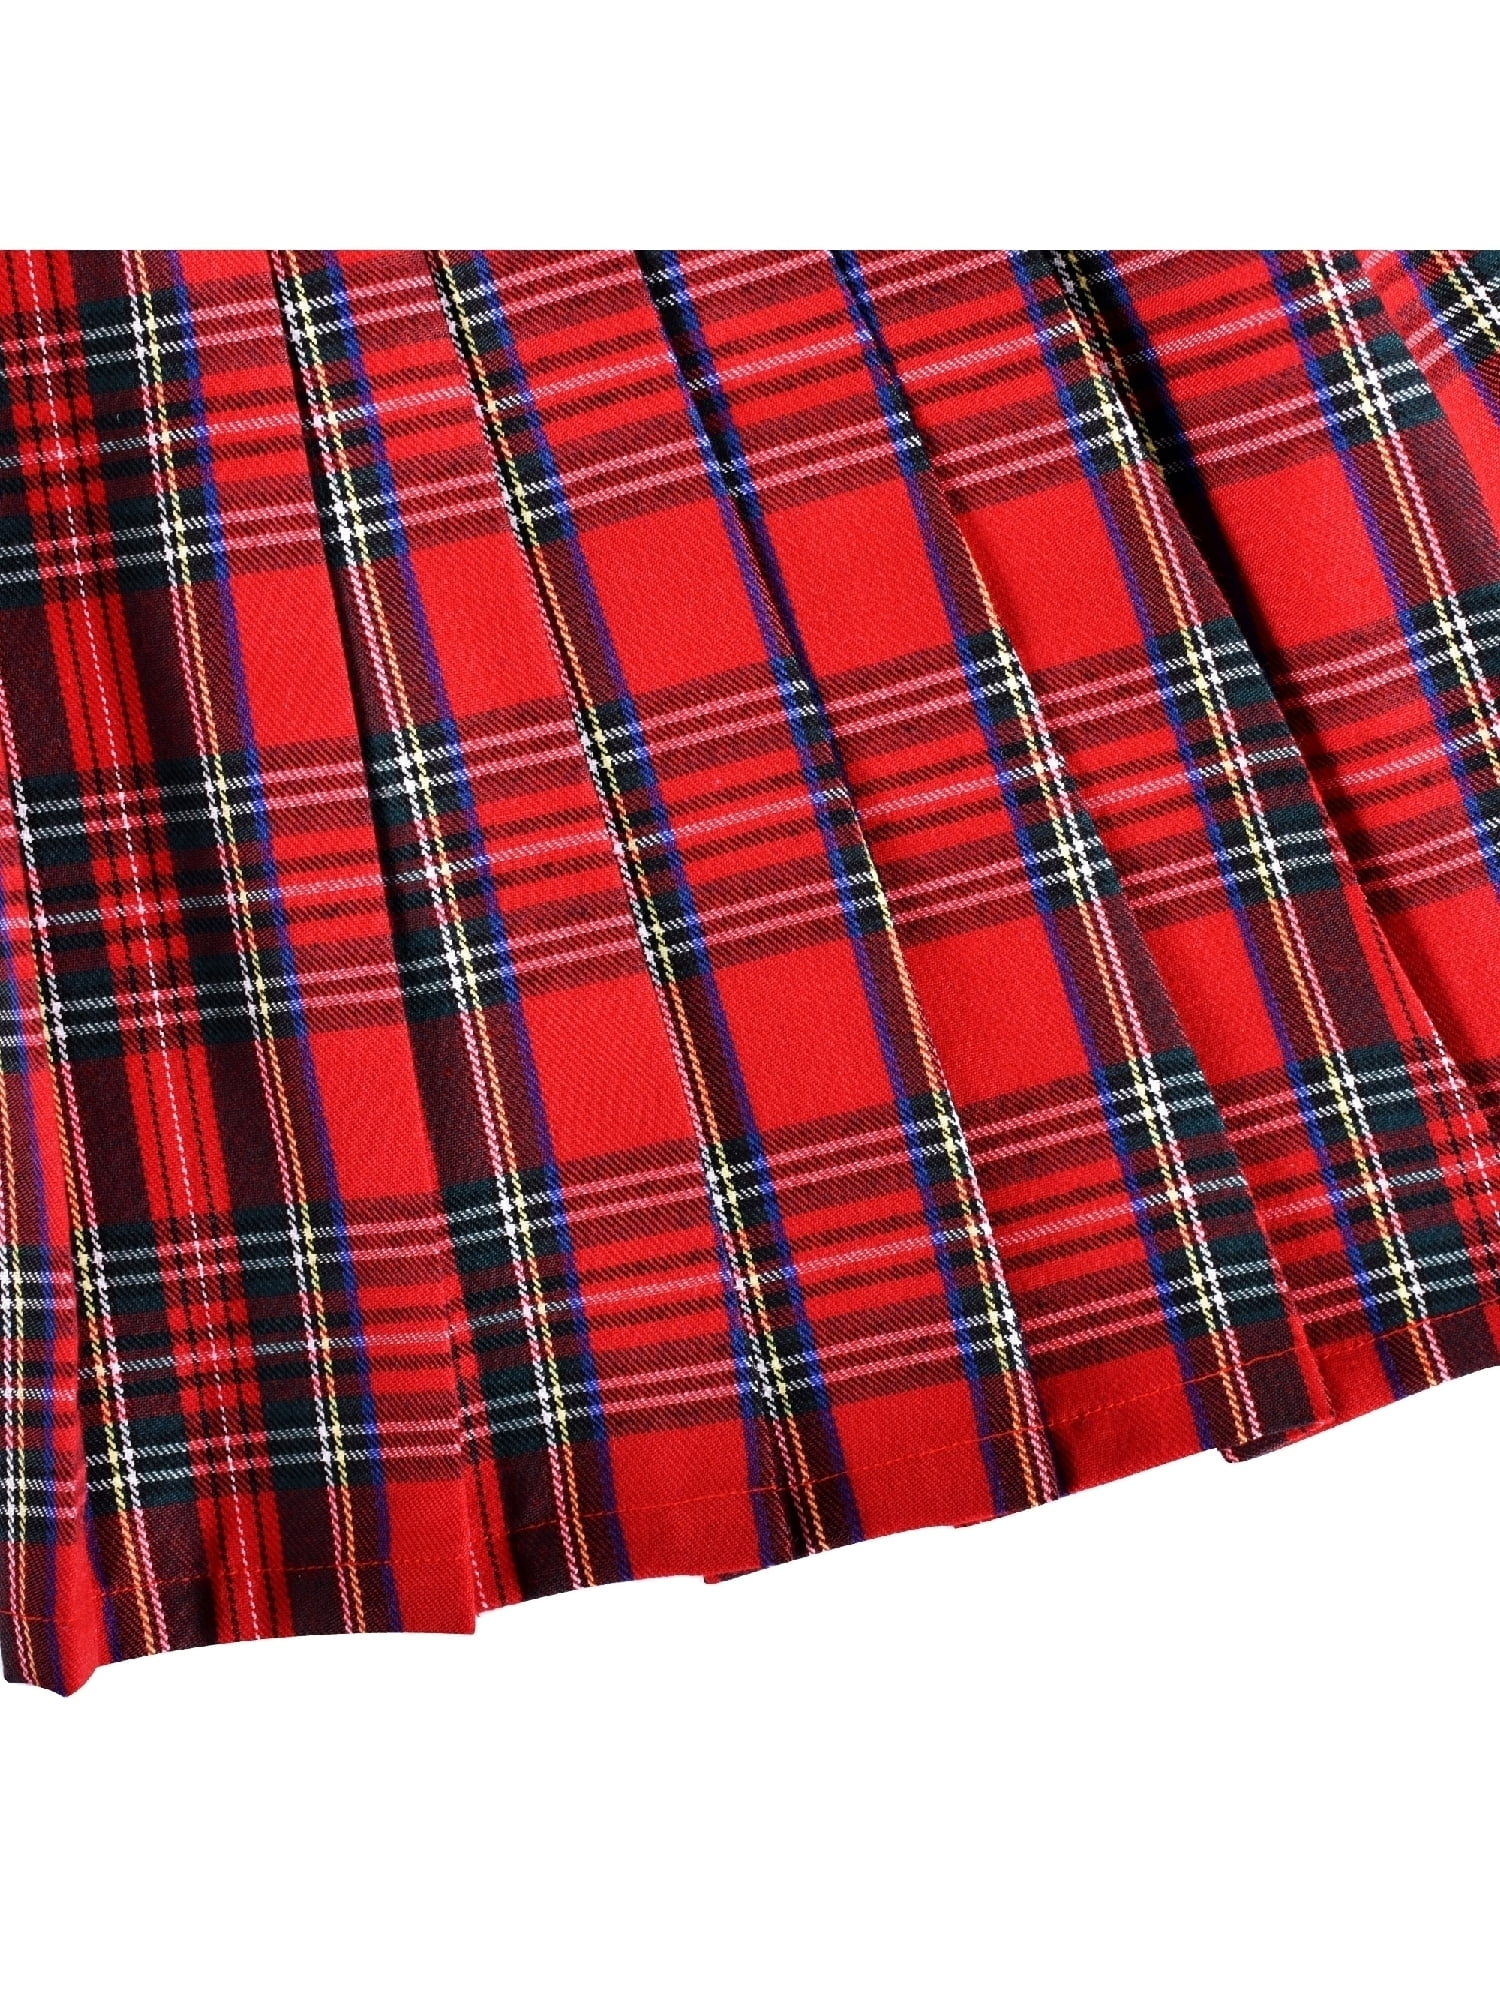 Details about   Handmade checked cotton clothing basic face mask Masai fabric 